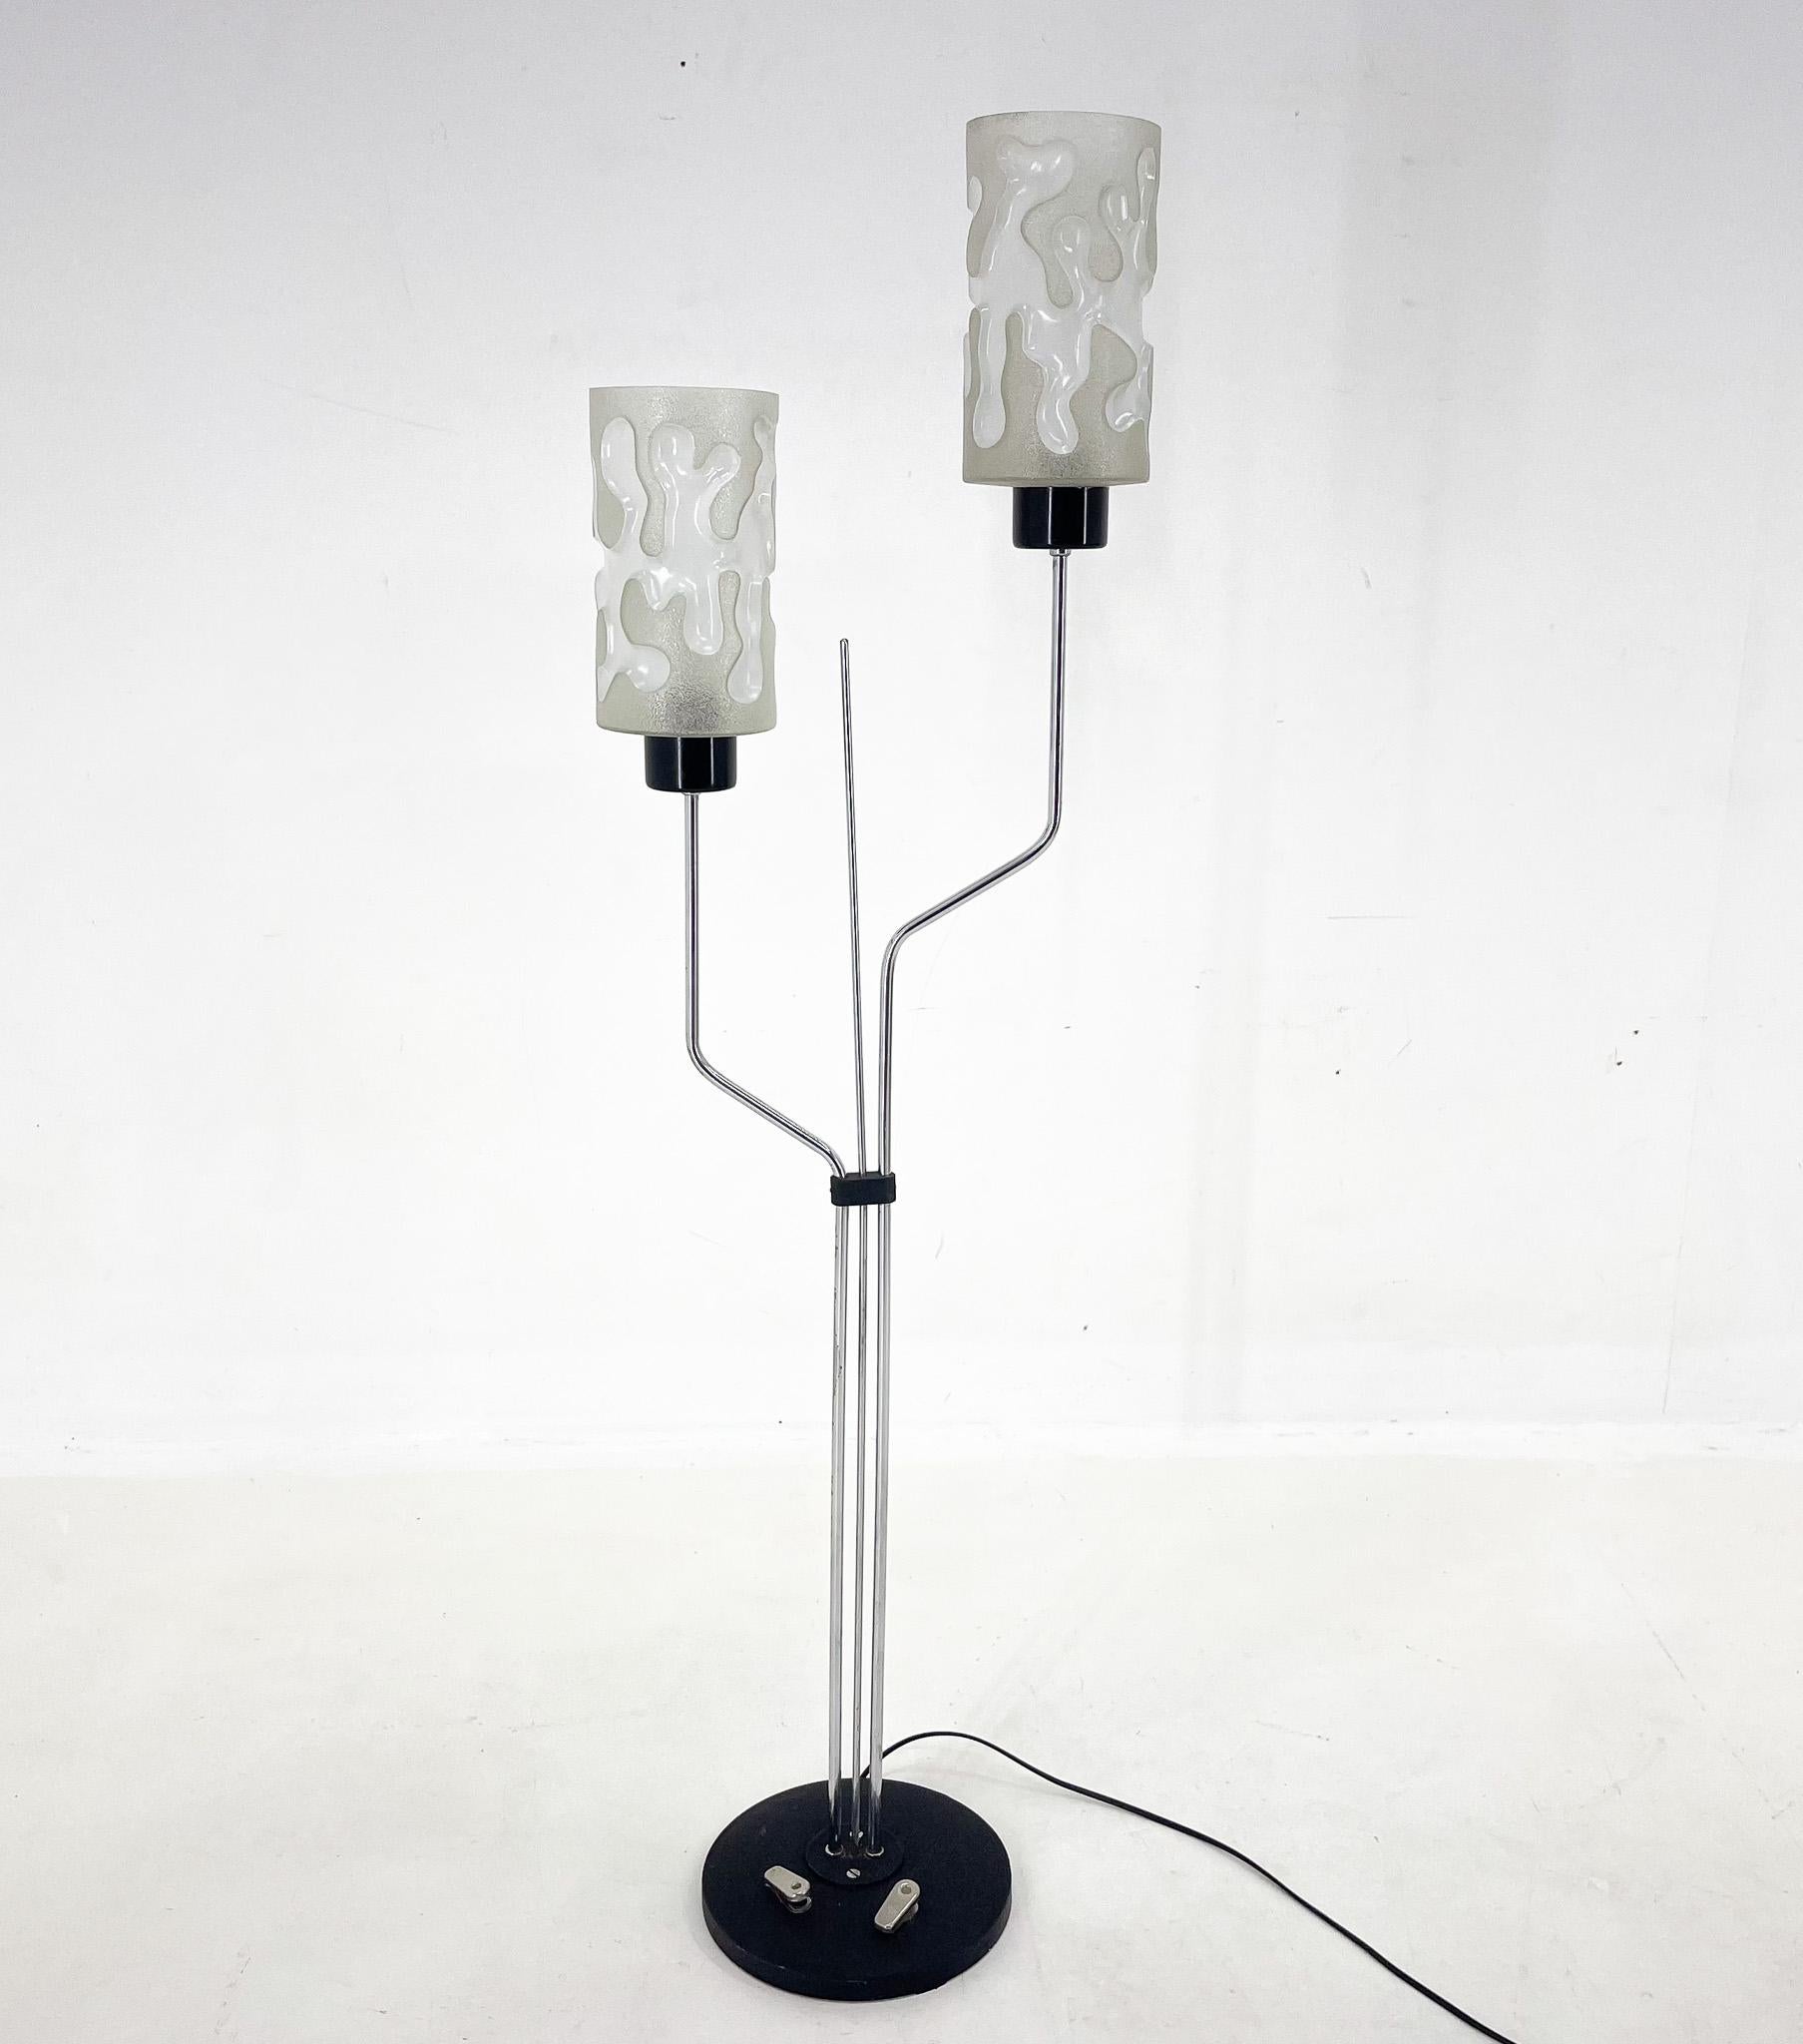 Vintage floor lamp made of chrome, metal and glass. Produced by the famous Lidokov company in former Czechoslovakiain the 1970's. The lamp has two original step-on switches that light the lights separetely. The diameter of the lamp shade is